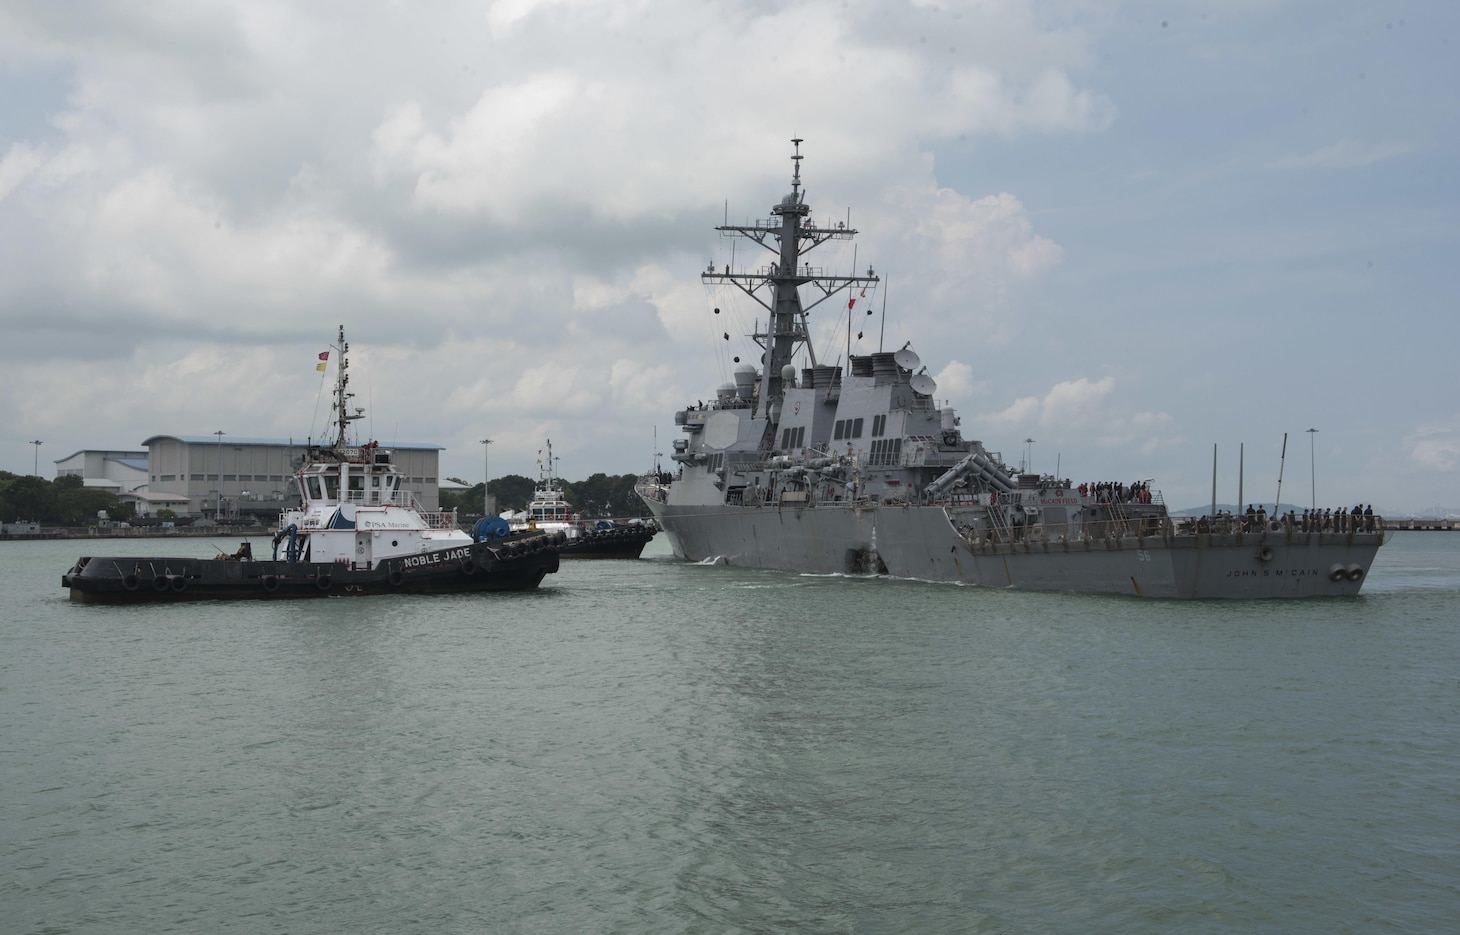 CHANGI NAVAL BASE, REPUBLIC OF SINGAPORE (Aug. 21, 2017) Tugboats from Singapore assist the guided-missile destroyer USS John S. McCain (DDG 56) as it steers towards Changi Naval Base, Republic of Singapore following a collision with the merchant vessel Alnic MC while underway east of the Straits of Malacca and Singapore on Aug. 21. Significant damage to the hull resulted in flooding to nearby compartments, including crew berthing, machinery, and communications rooms. Damage control efforts by the crew halted further flooding. The incident will be investigated. (U.S. Navy photo by Mass Communication Specialist 2nd Class Joshua Fulton/Released)